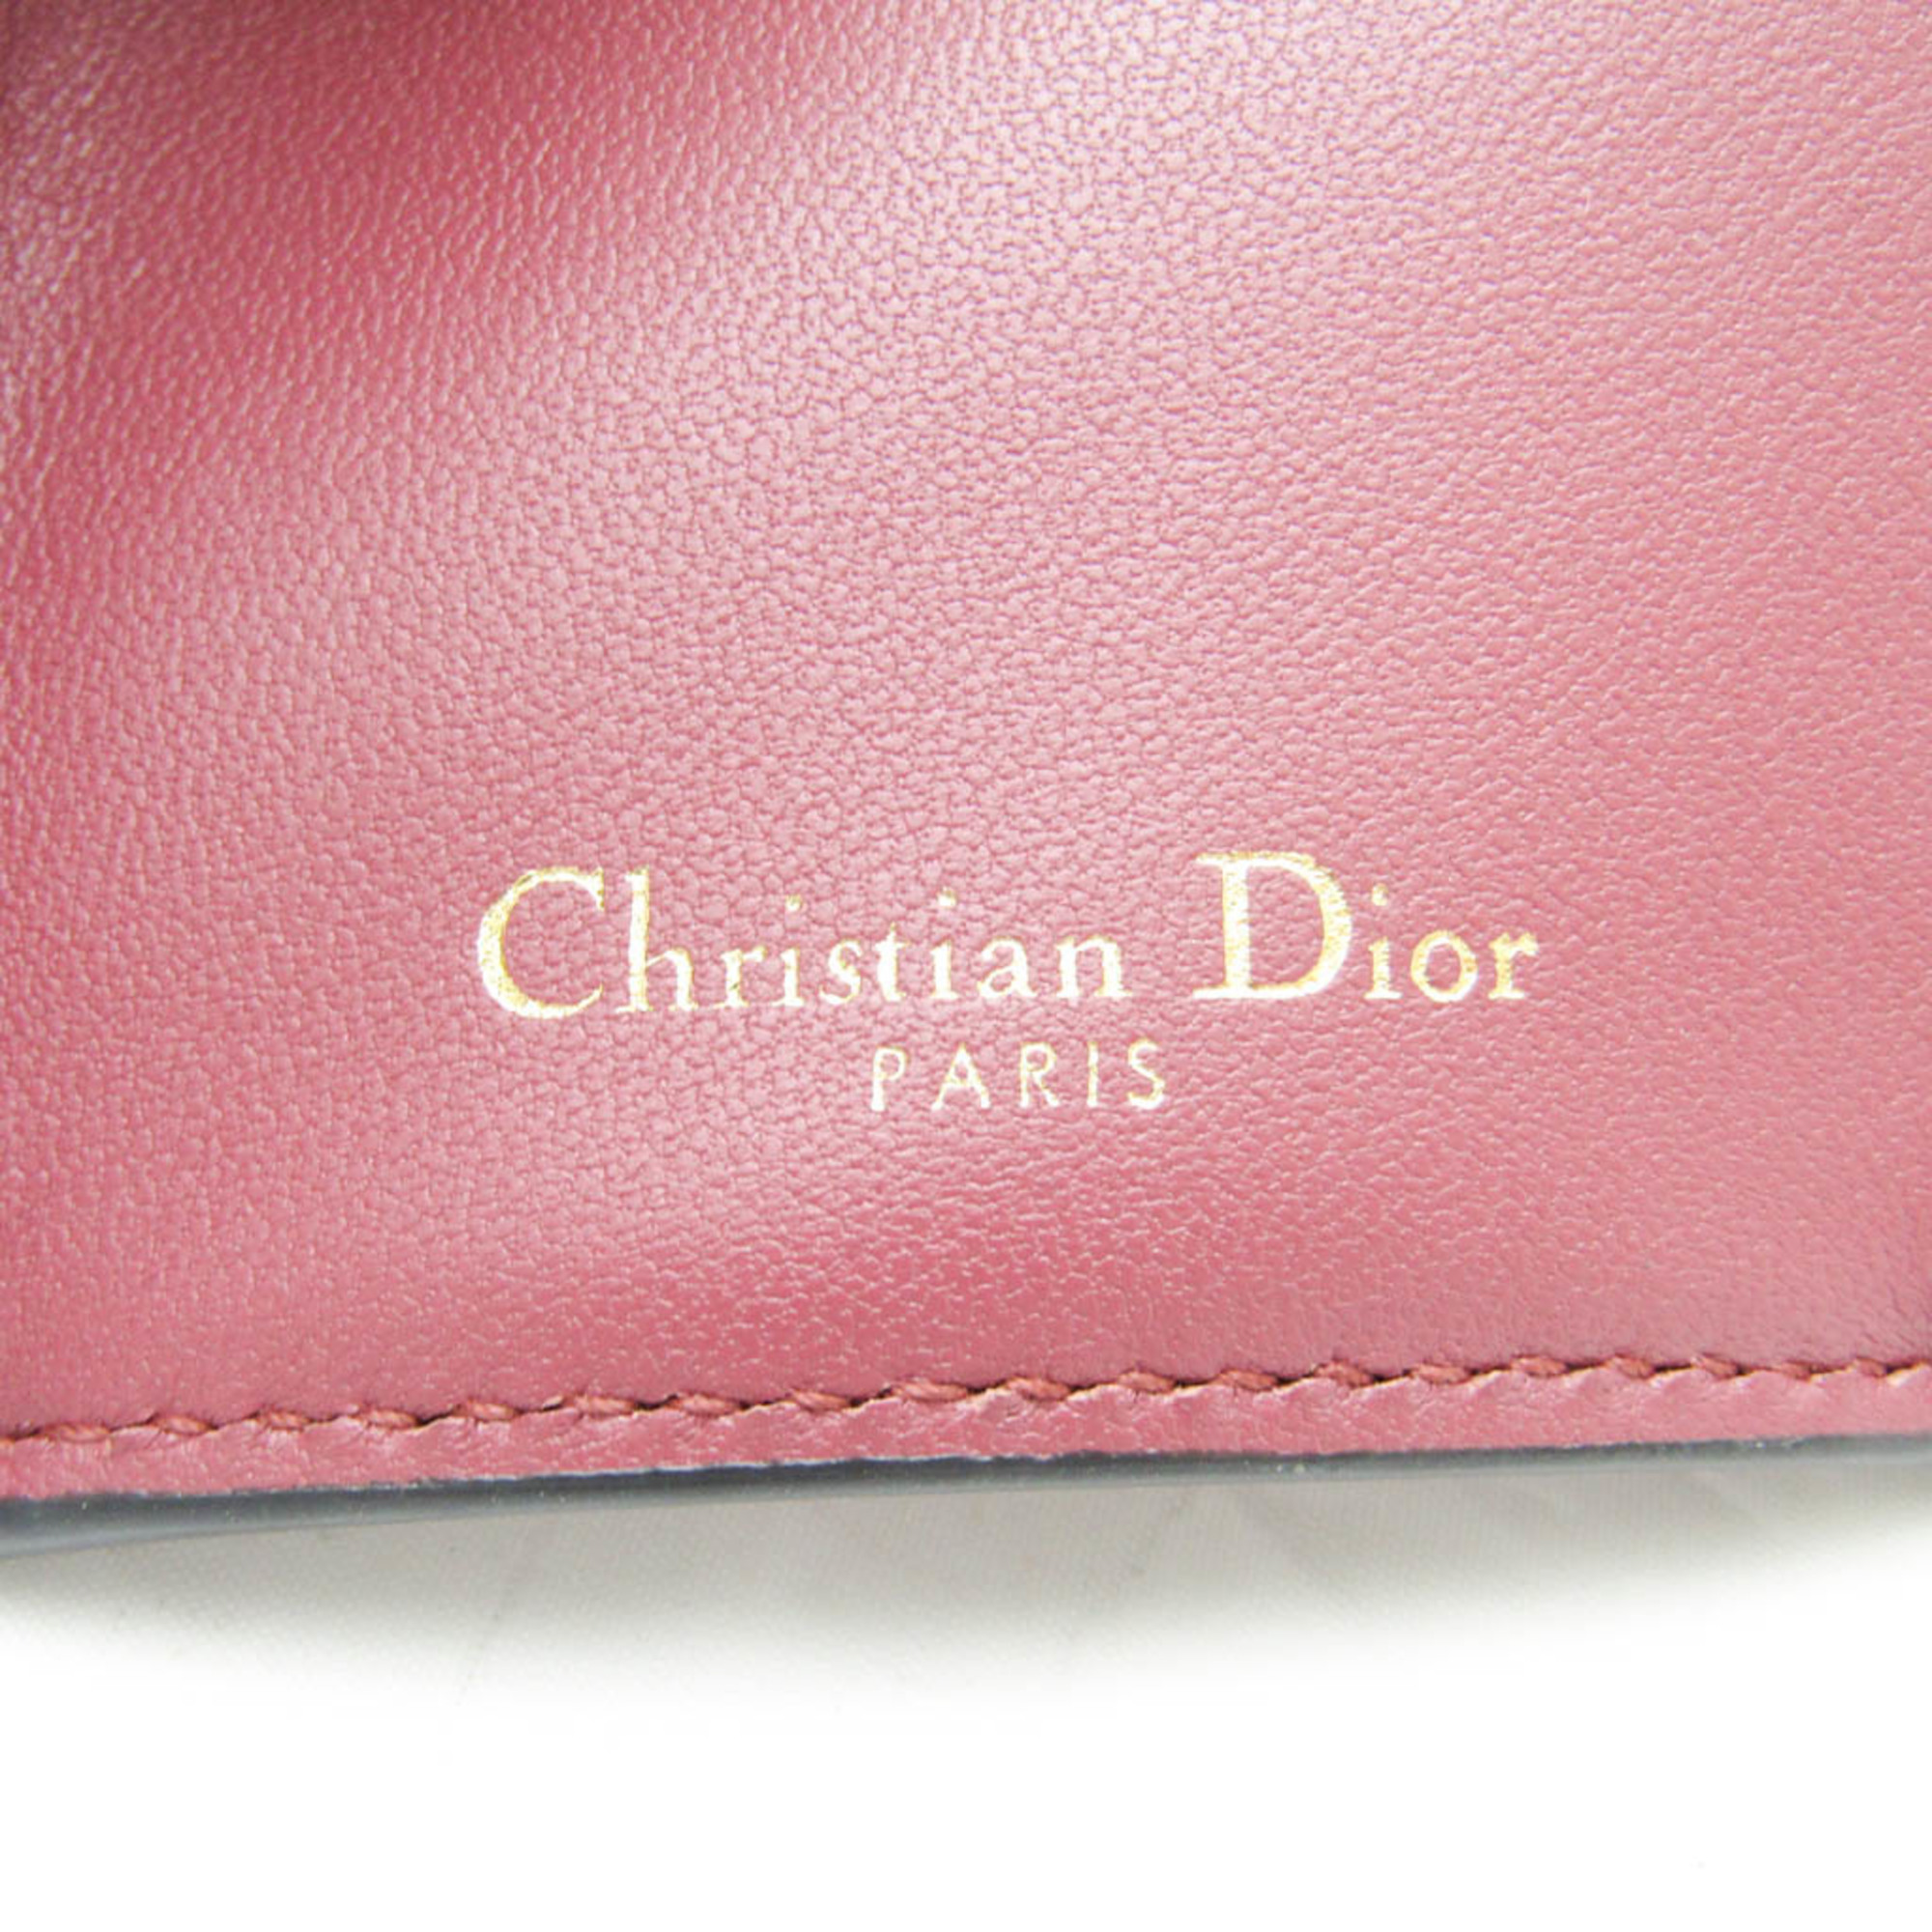 Christian Dior Saddle Wallet Women's Leather Wallet (tri-fold) Dusty Pink